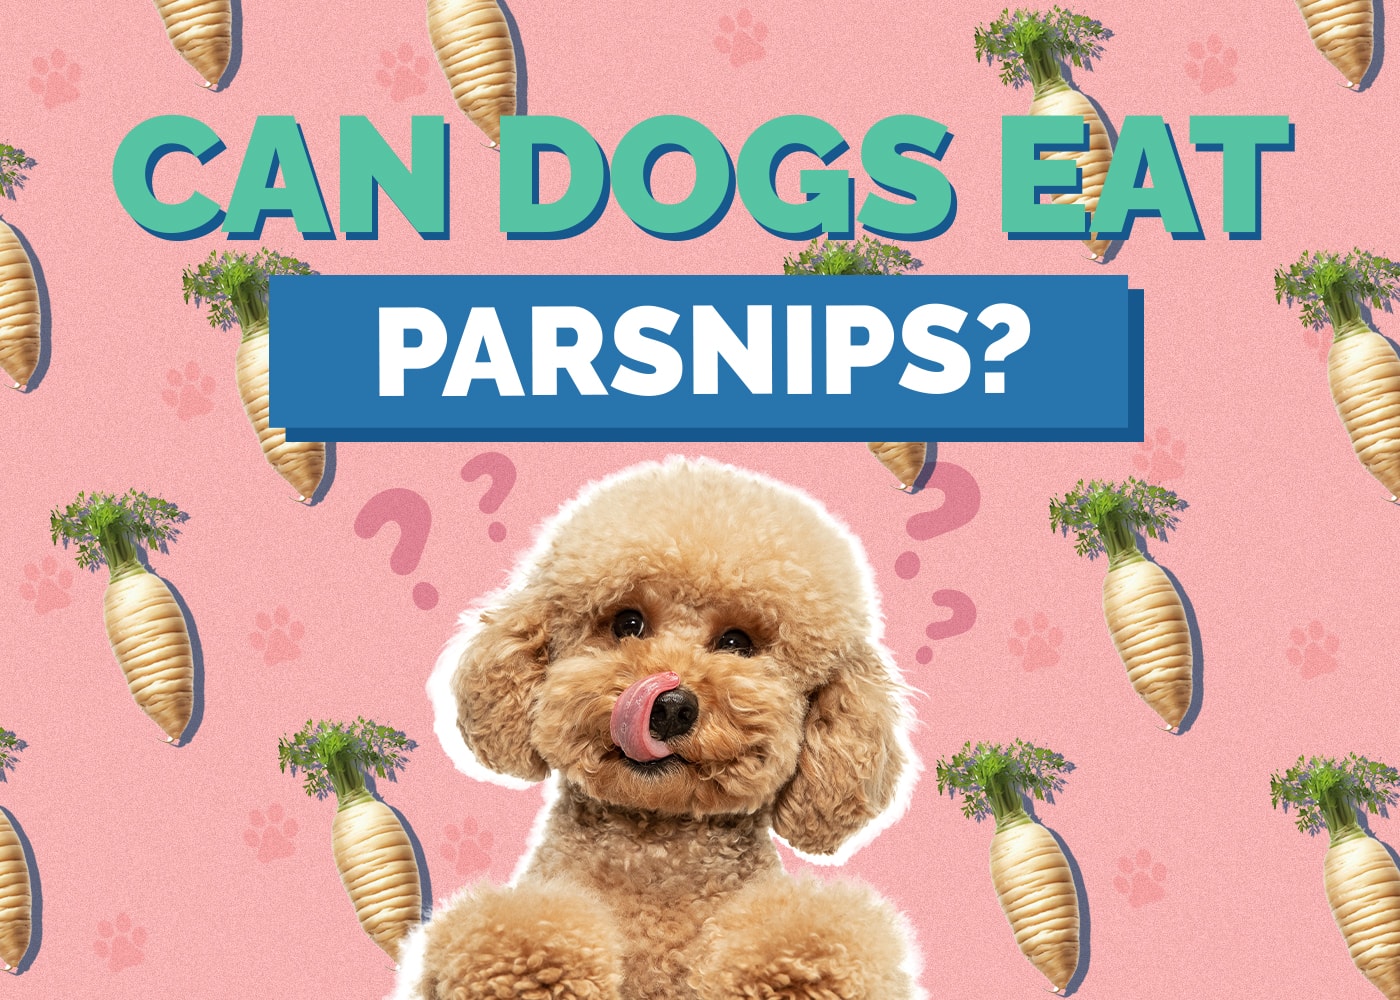 Can Dogs Eat parsnips